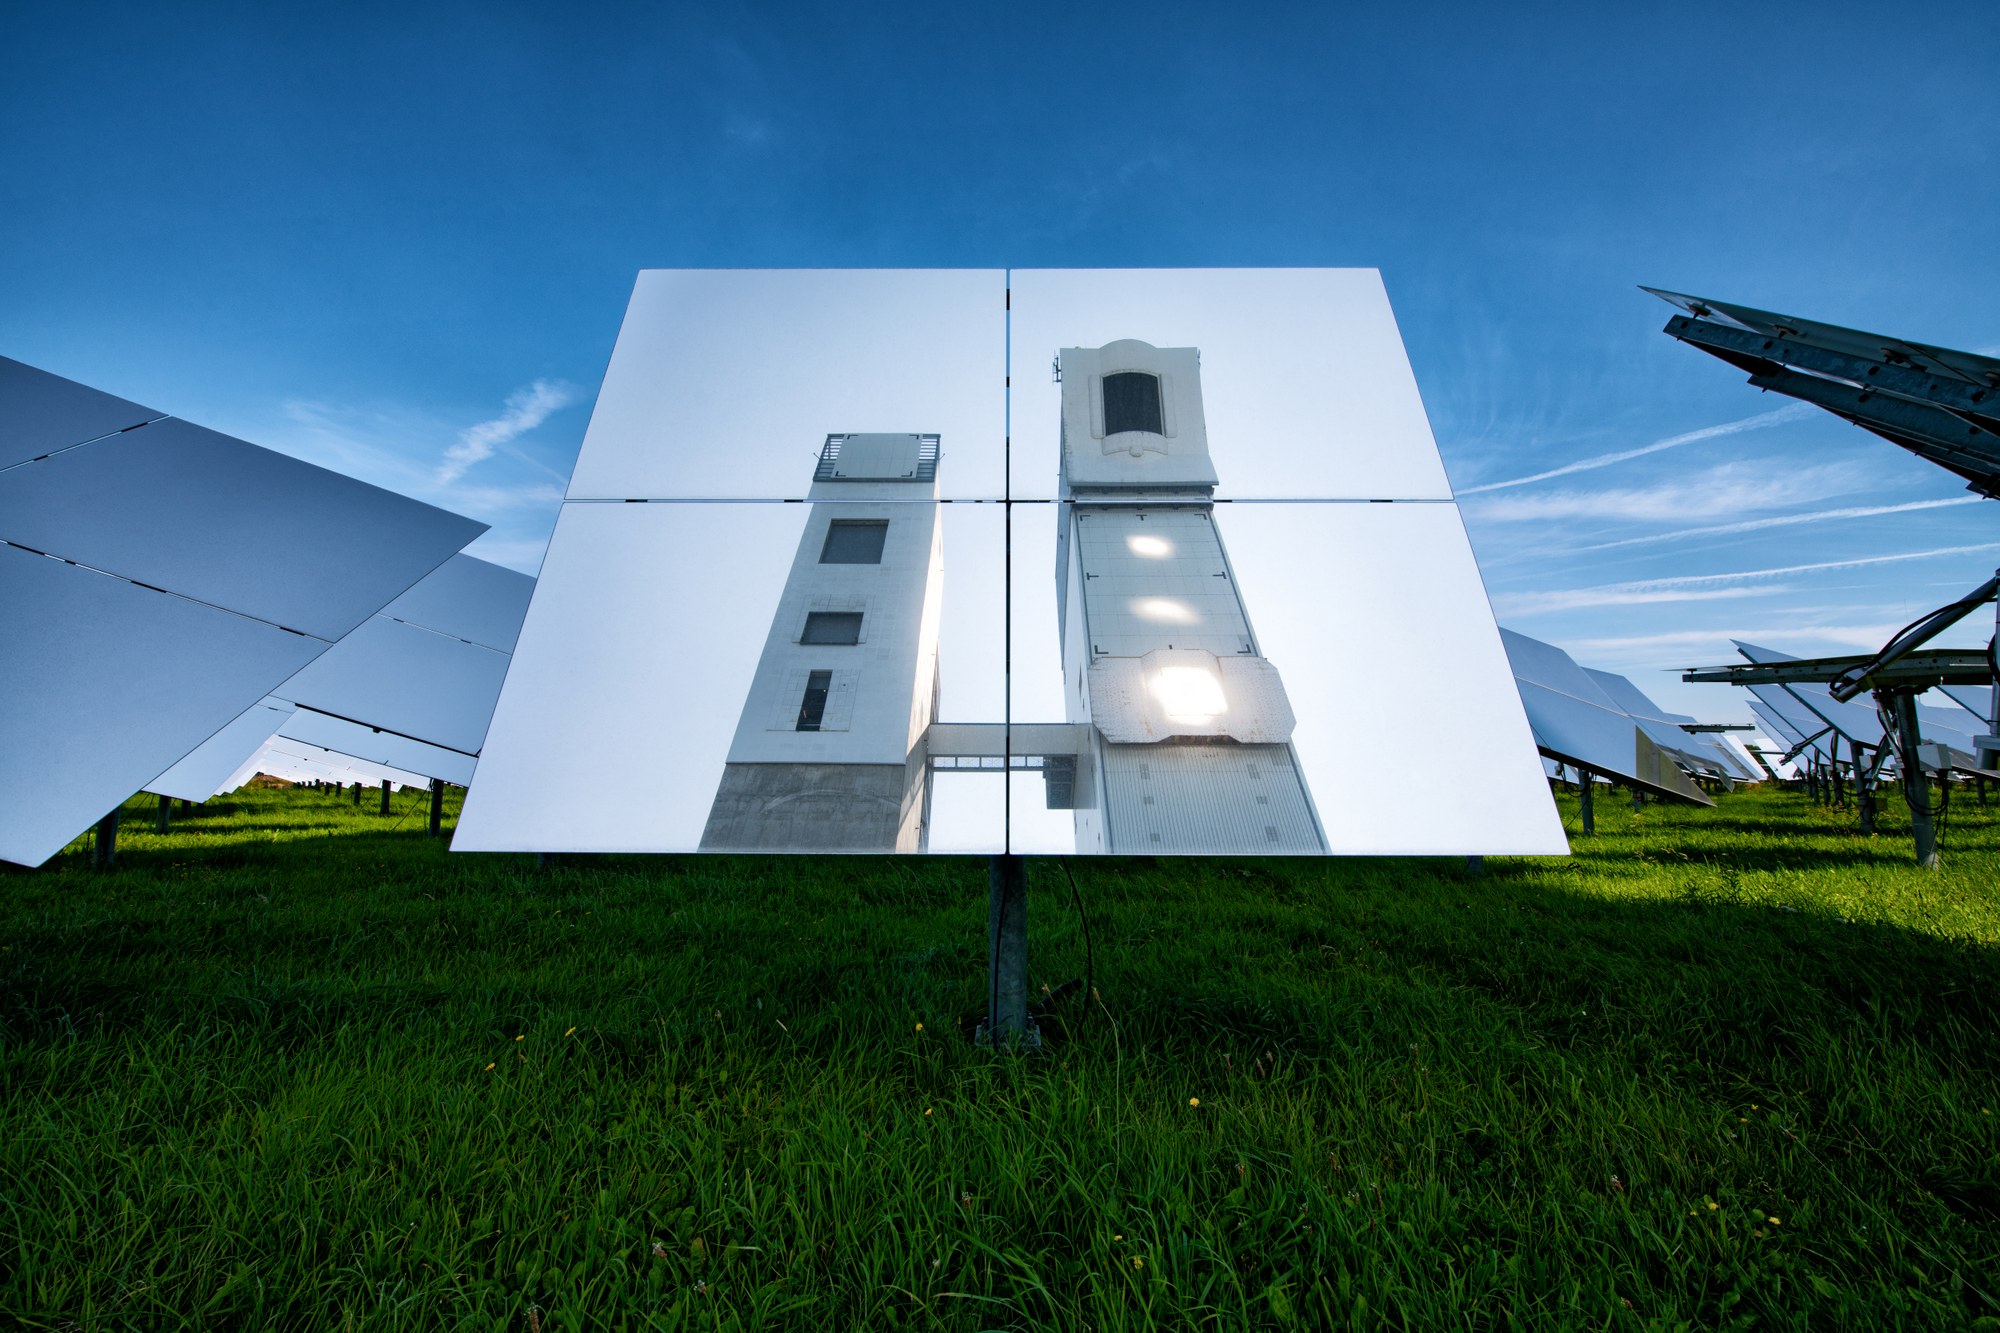 A heliostat in which the two solar towers of Jülich are reflected.